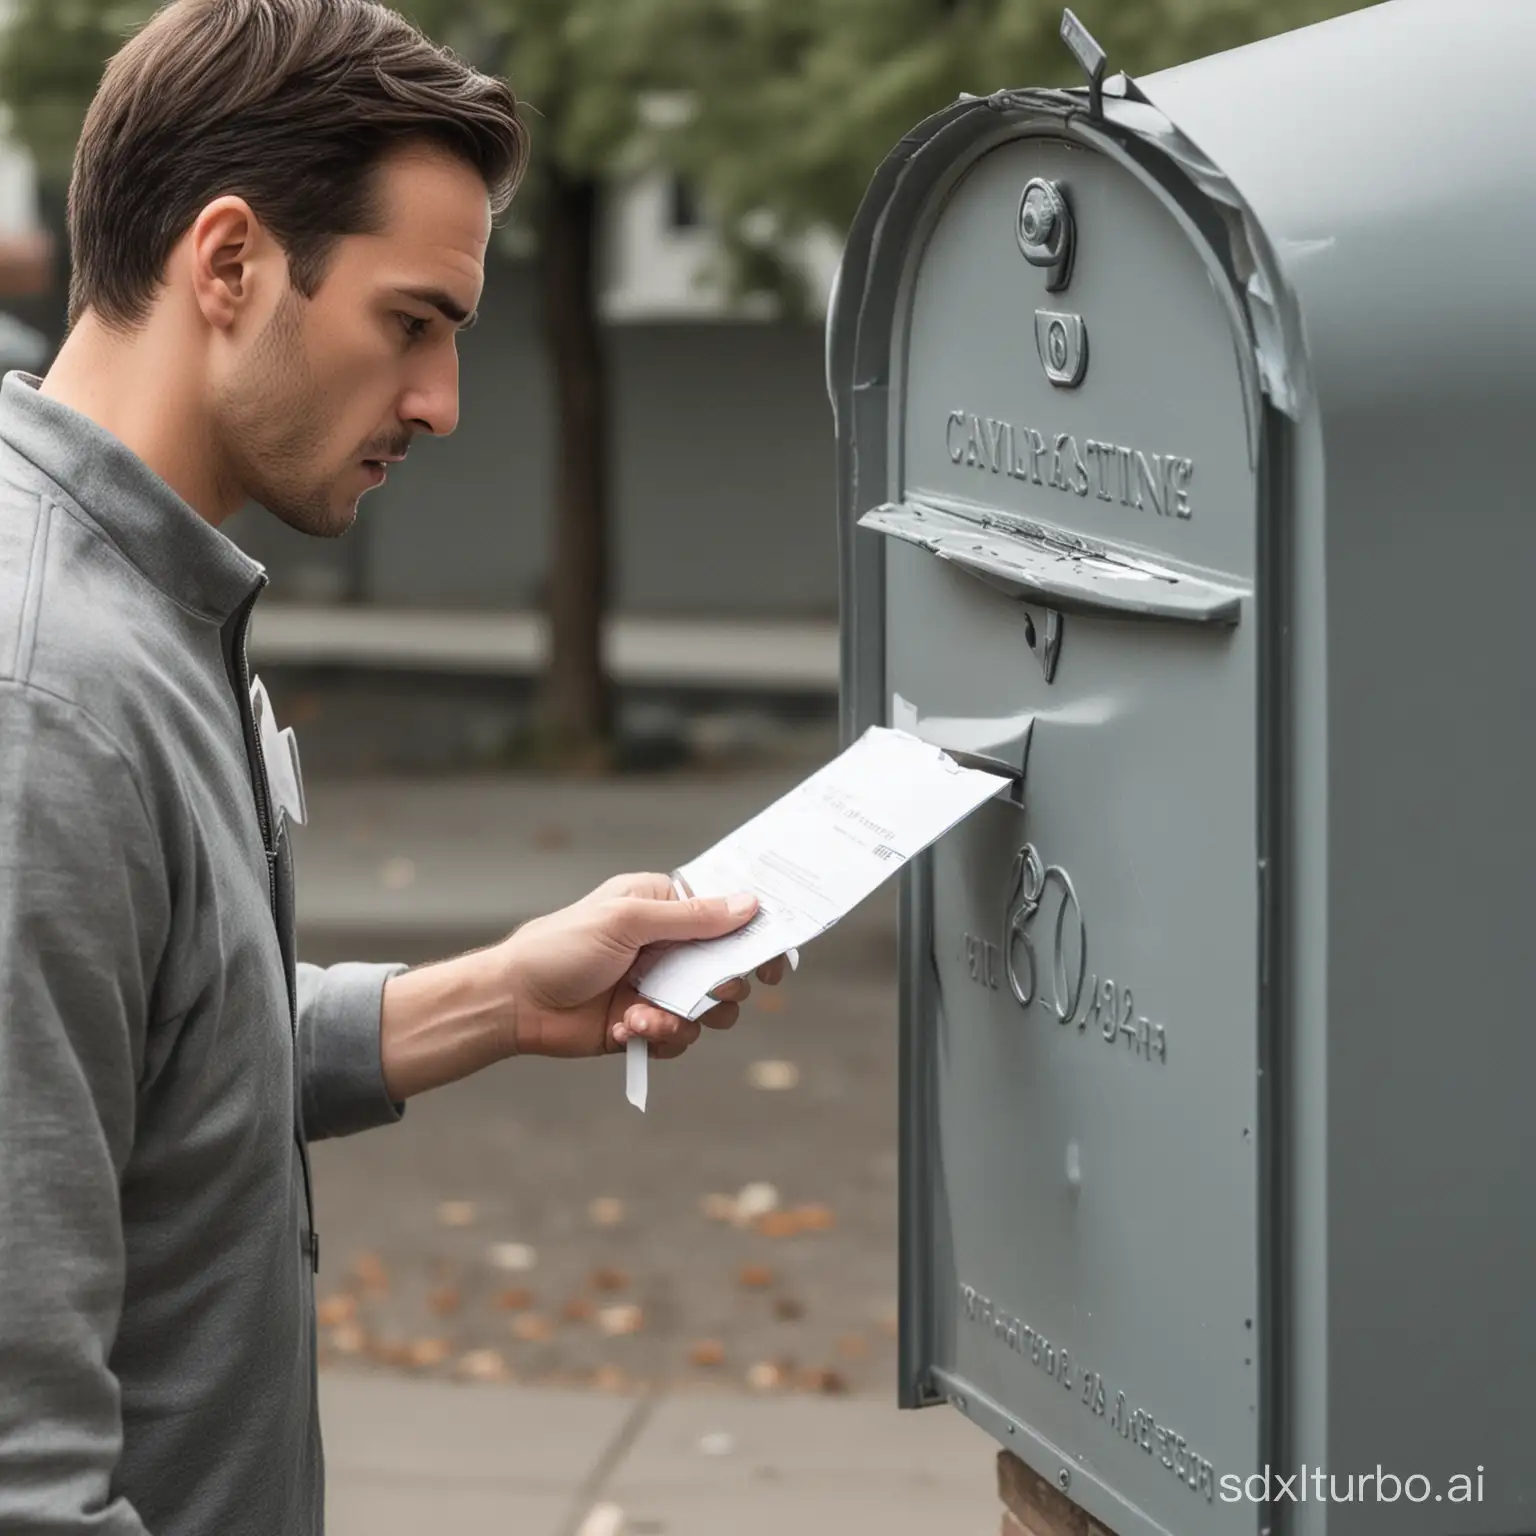 a man is in front of a mailbox, and he is holding an envelope in his hand, next to him is a man partially erased by an eraser